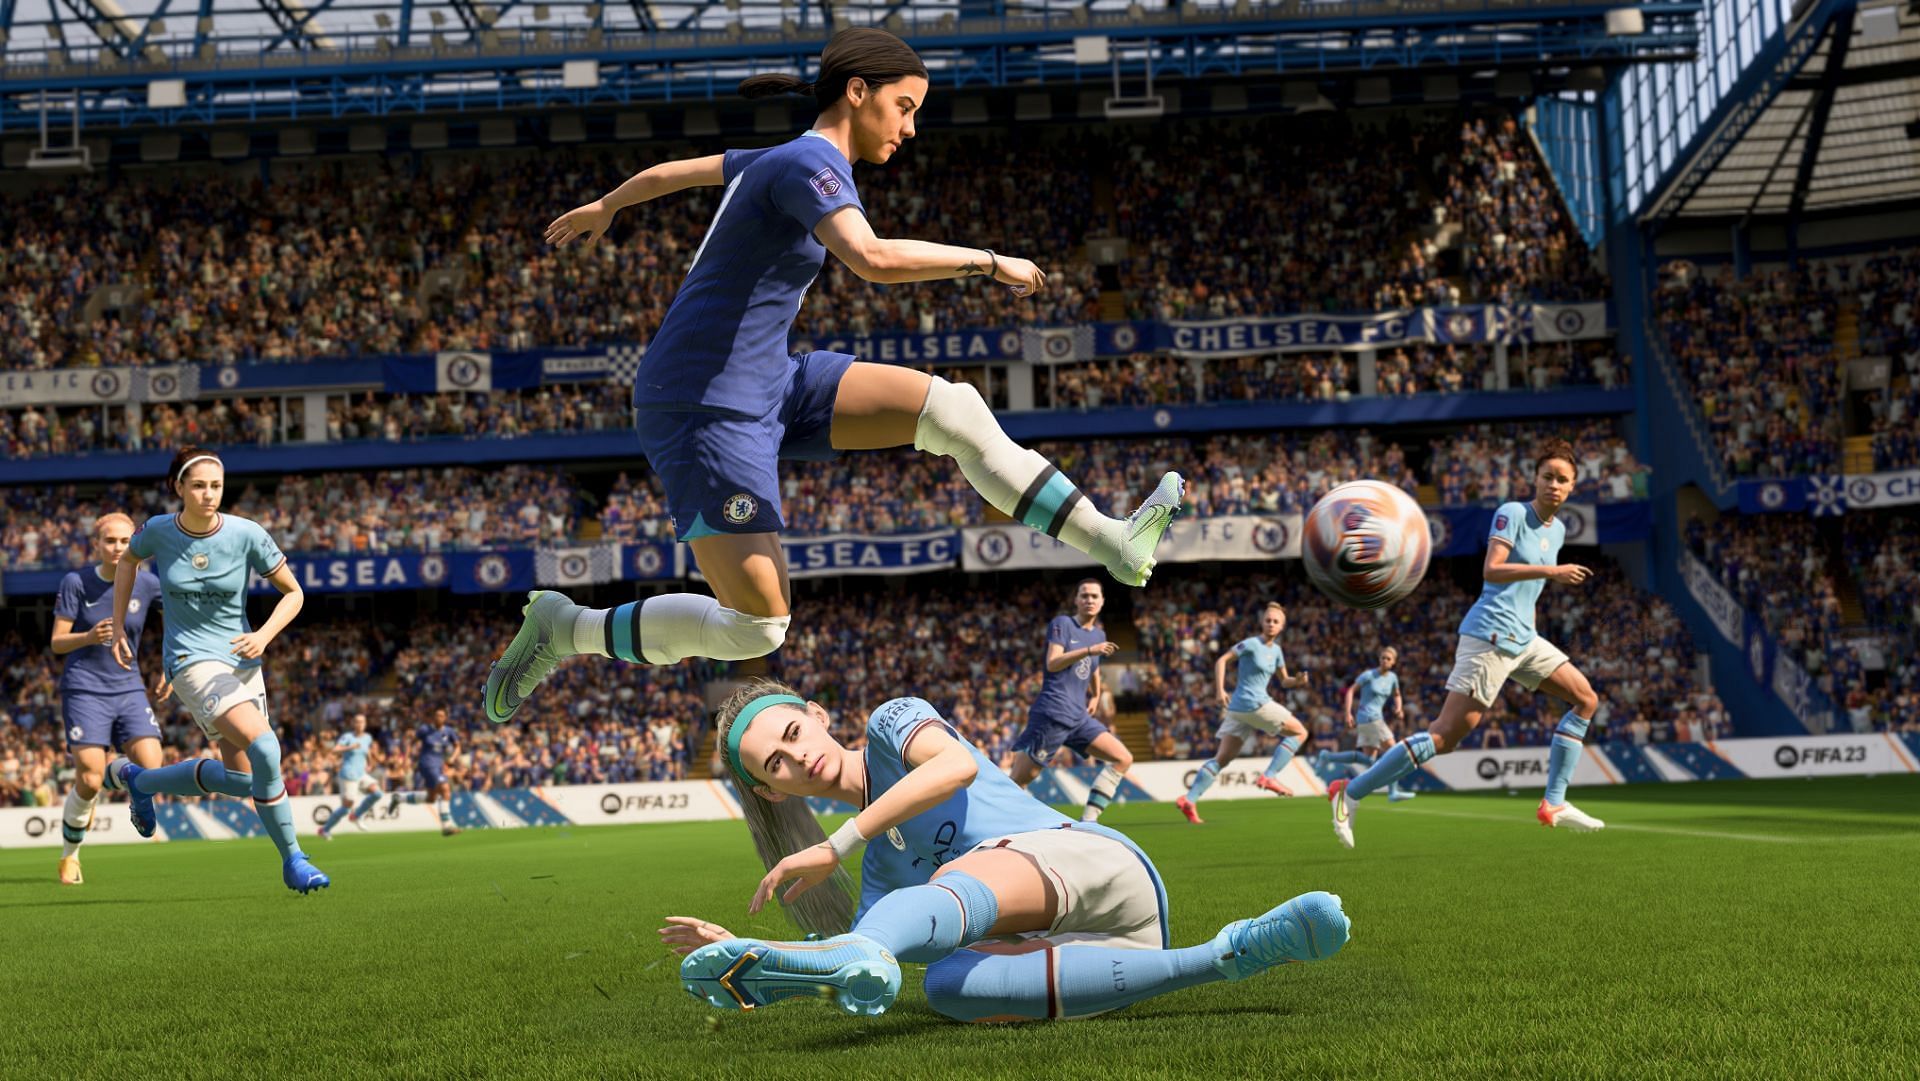 FIFA 23 cross-play controversy explained